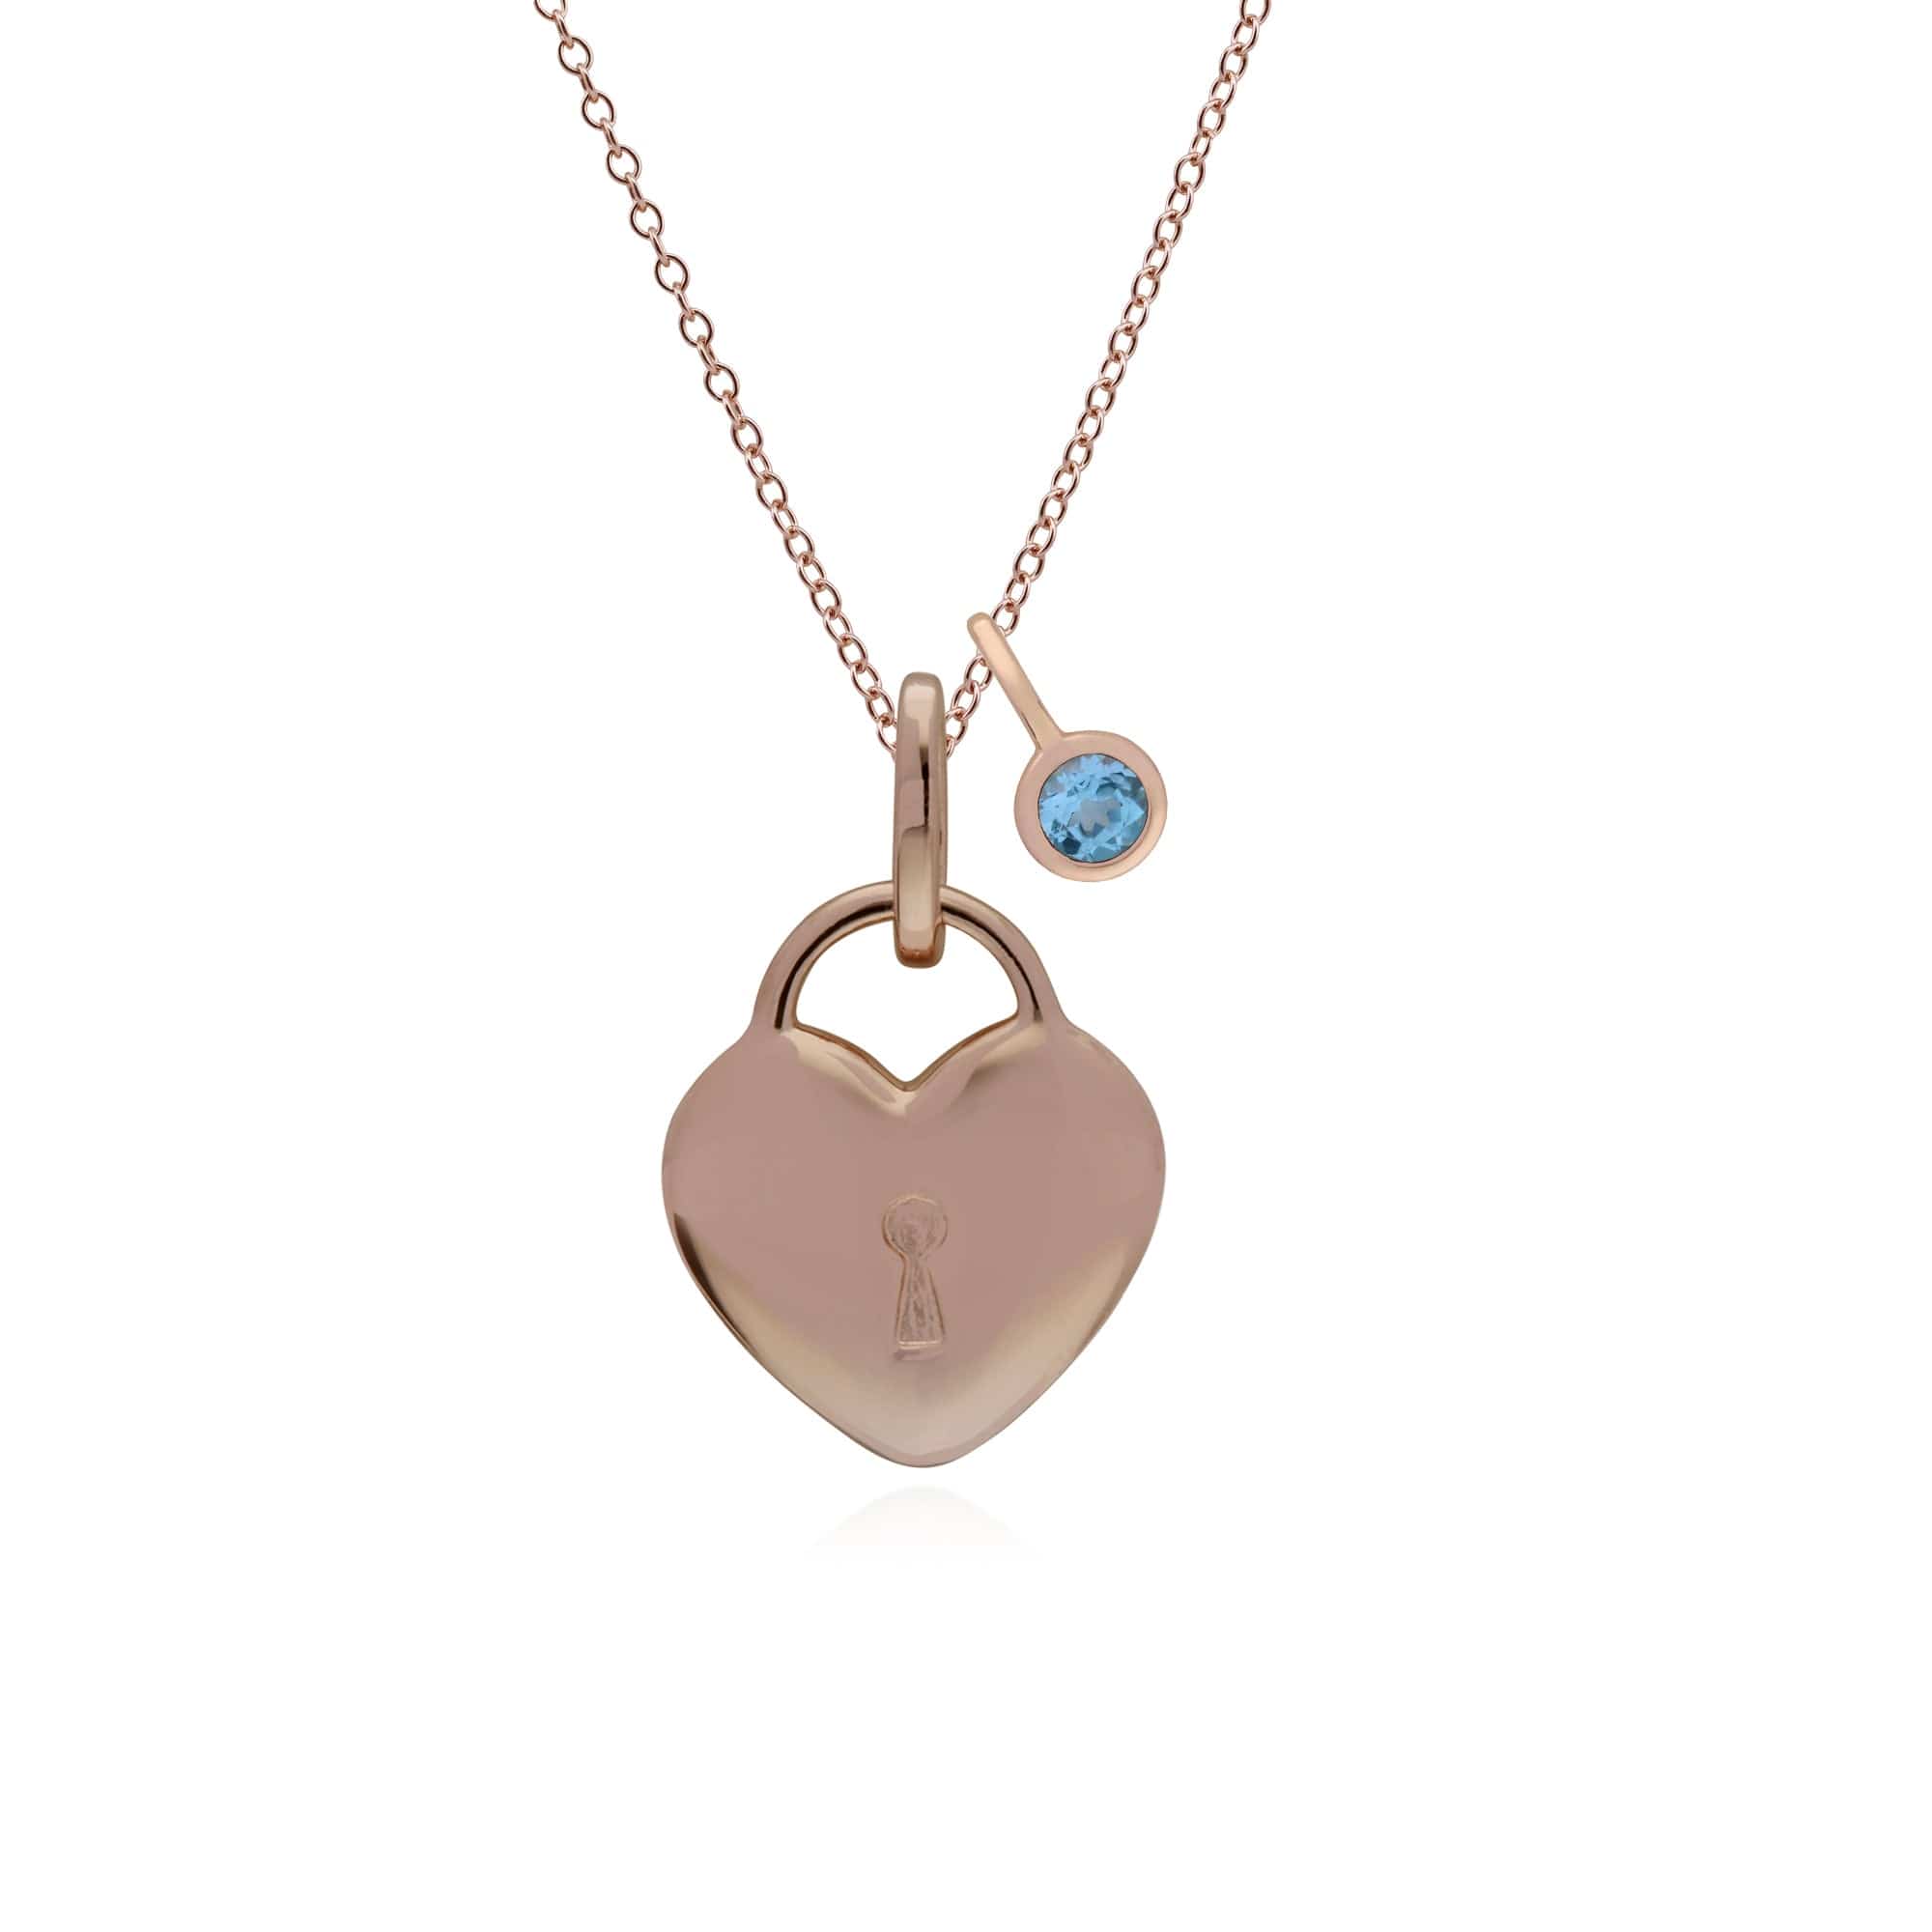 270P027303925-270P026901925 Classic Heart Lock Pendant & Blue Topaz Charm in Rose Gold Plated 925 Sterling Silver 1